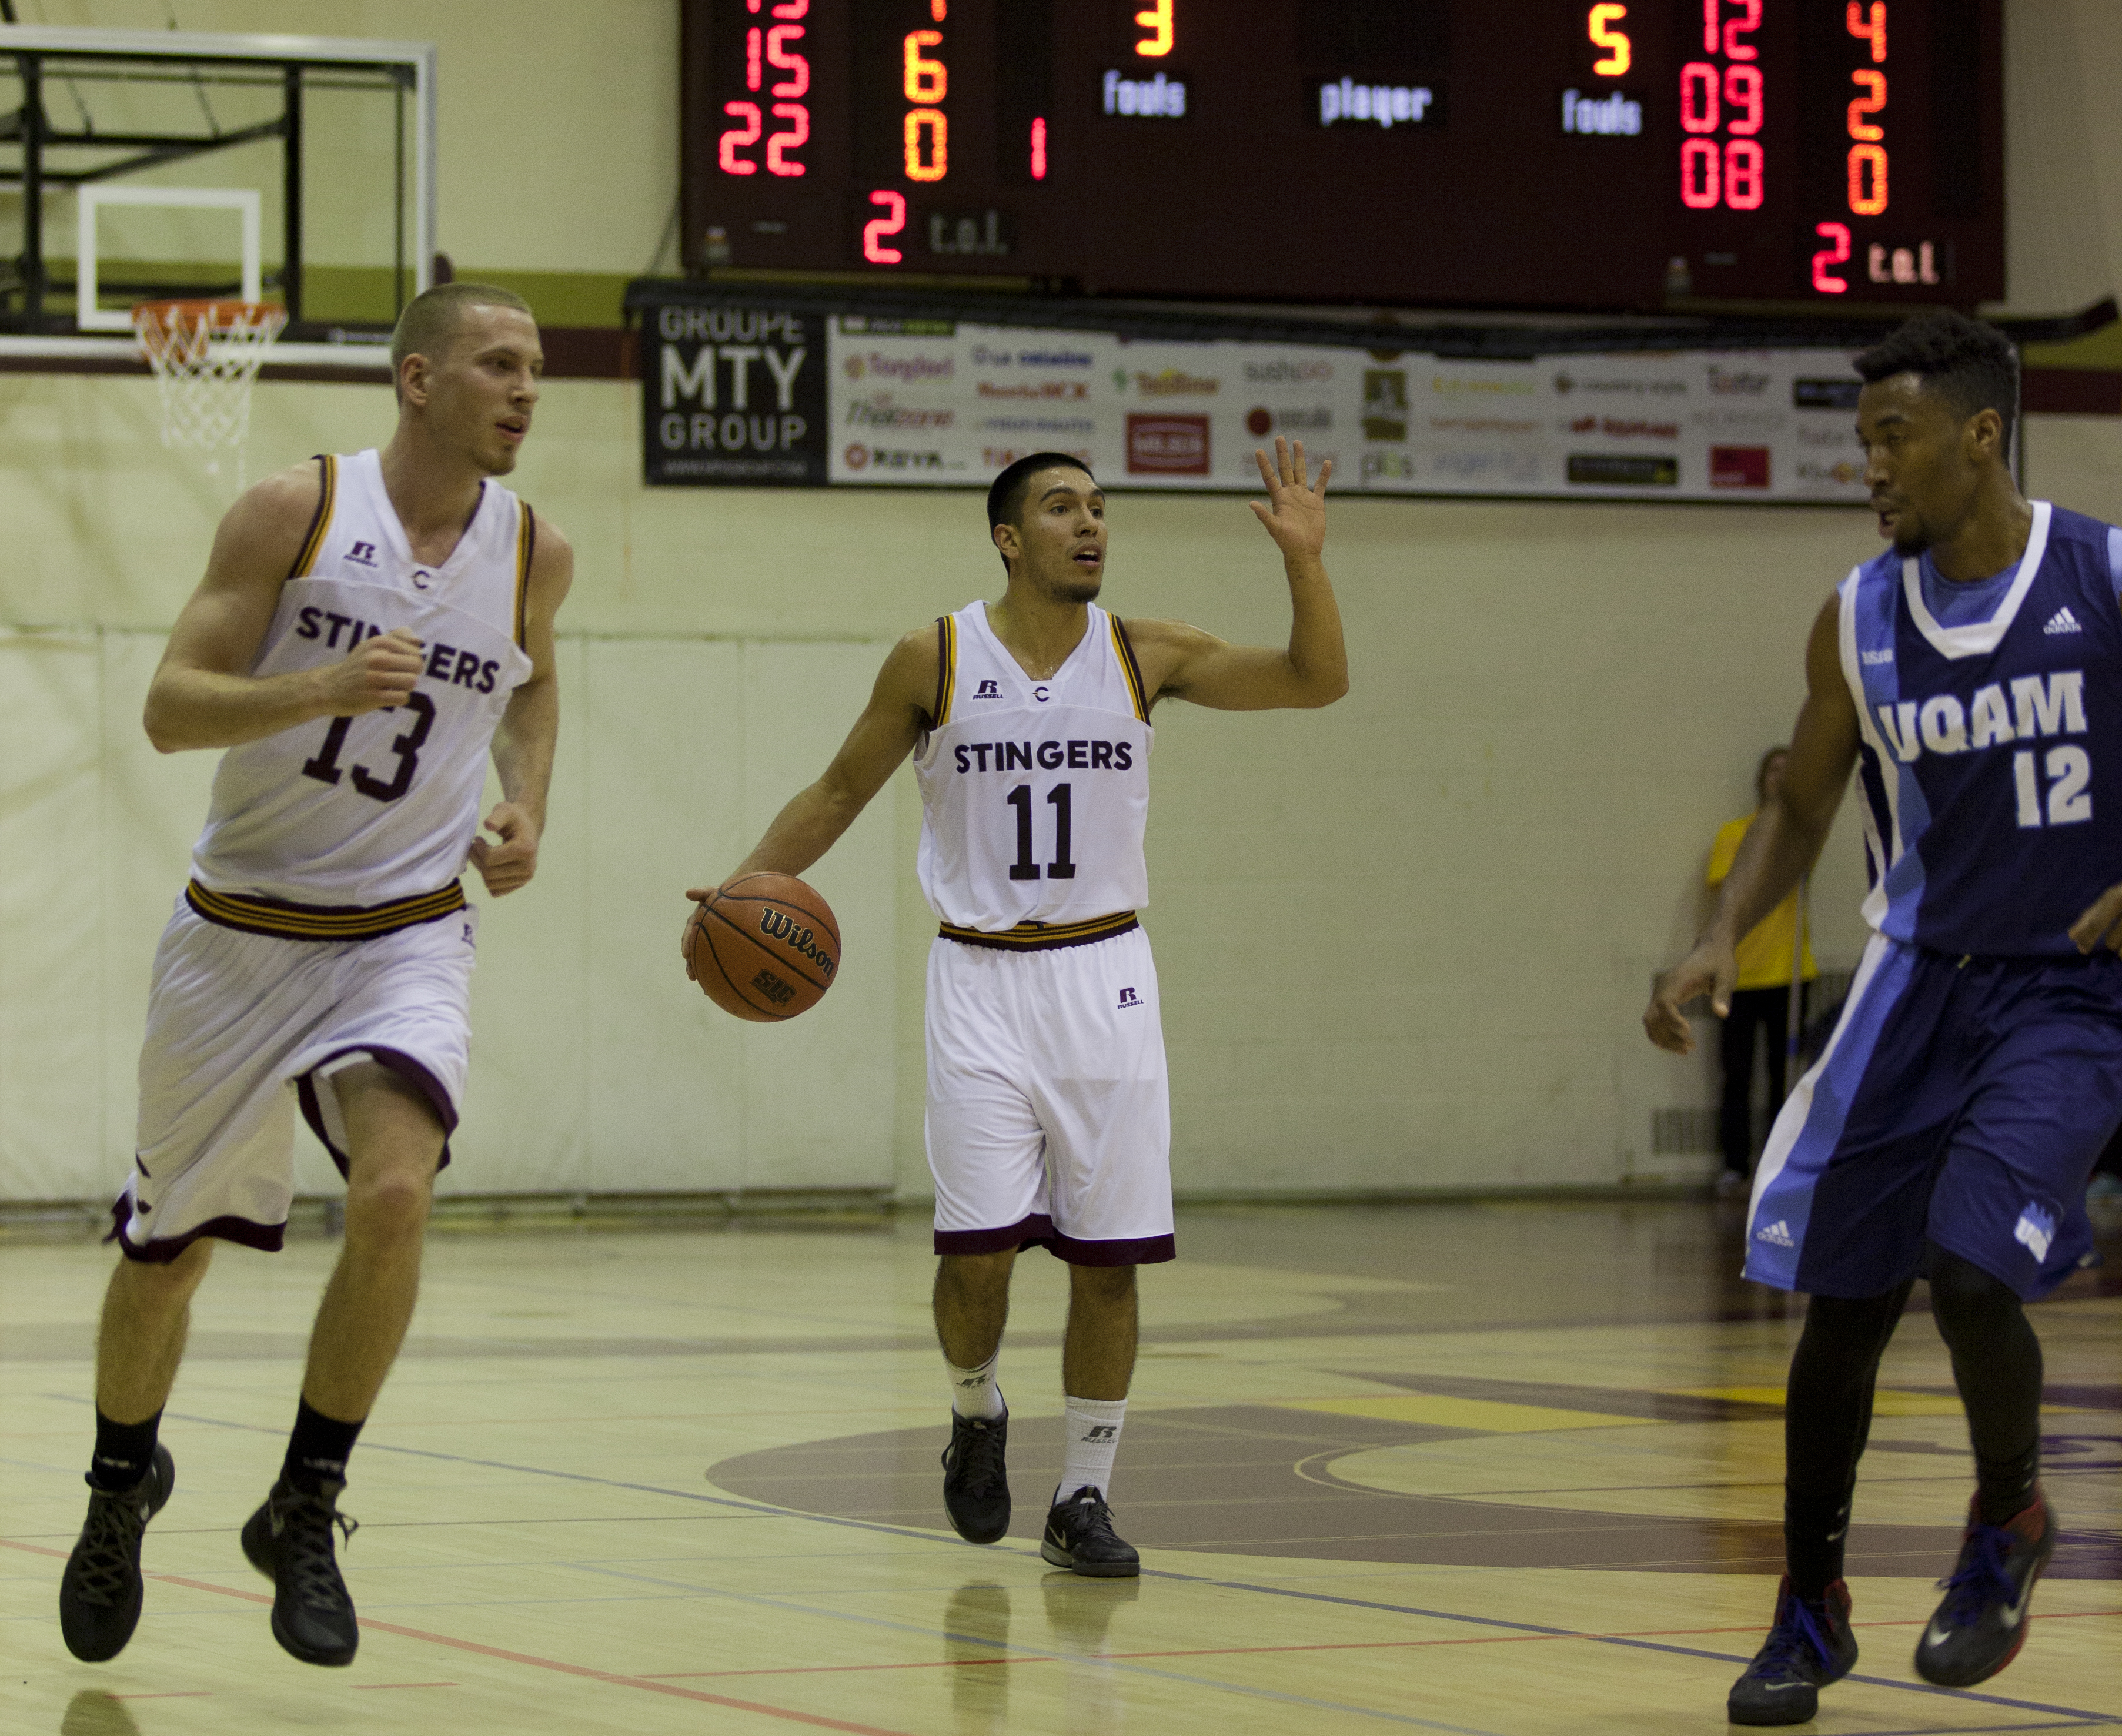 Stingers point guard Ricardo Monge sets up a play. Photo by Marie-Pierre Savard.